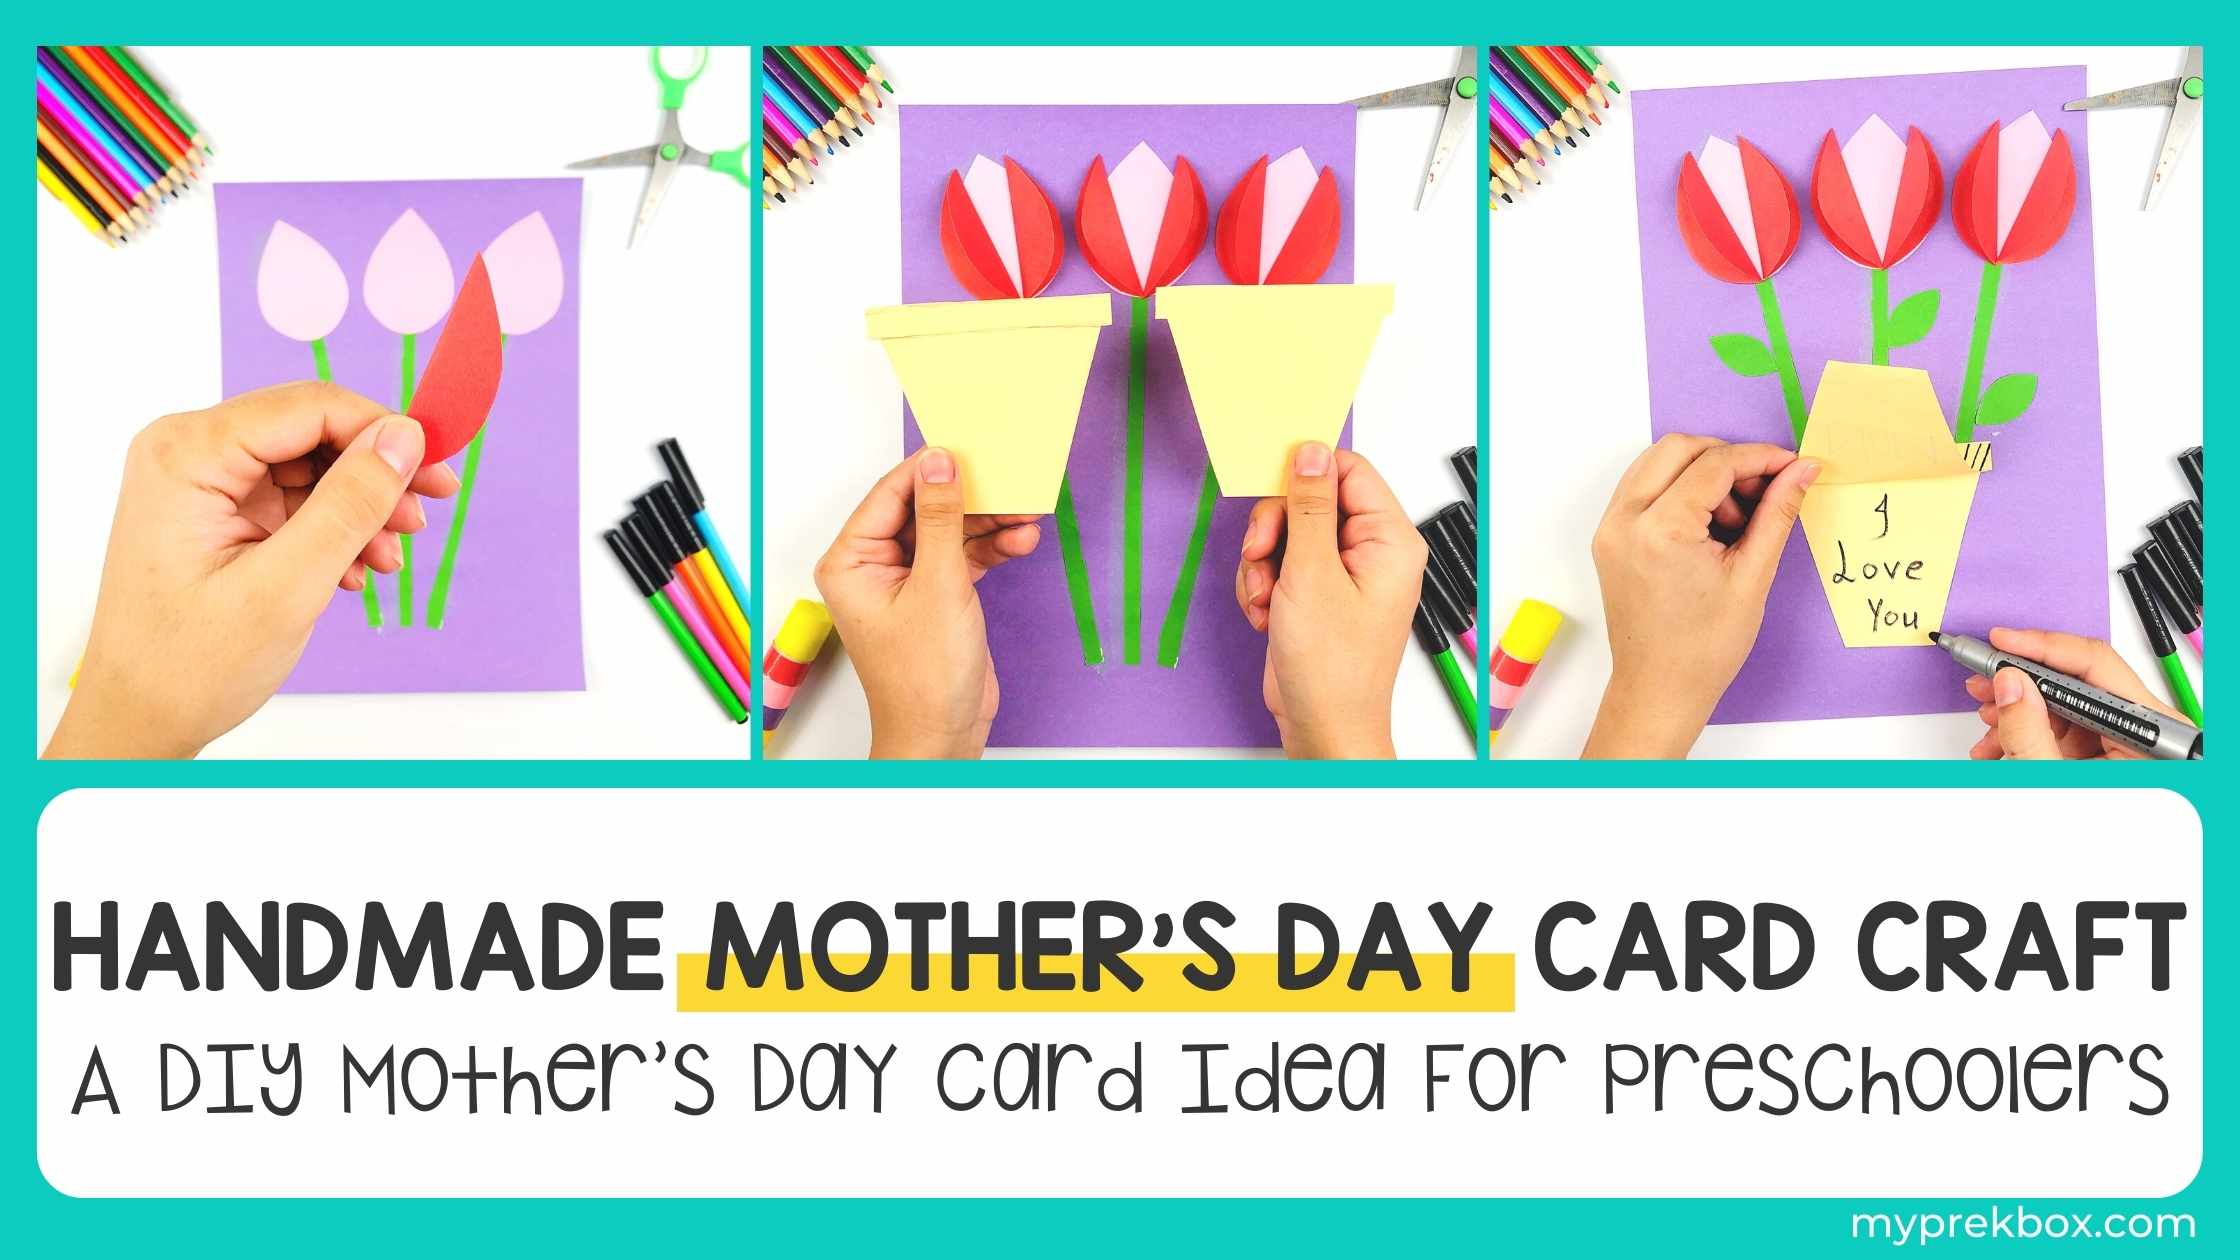 https://static.subbly.me/fs/subbly/userFiles/my-prek-box/images/a-278-mothersday-card-craft-header-1651630279718.jpg?v=1651630282